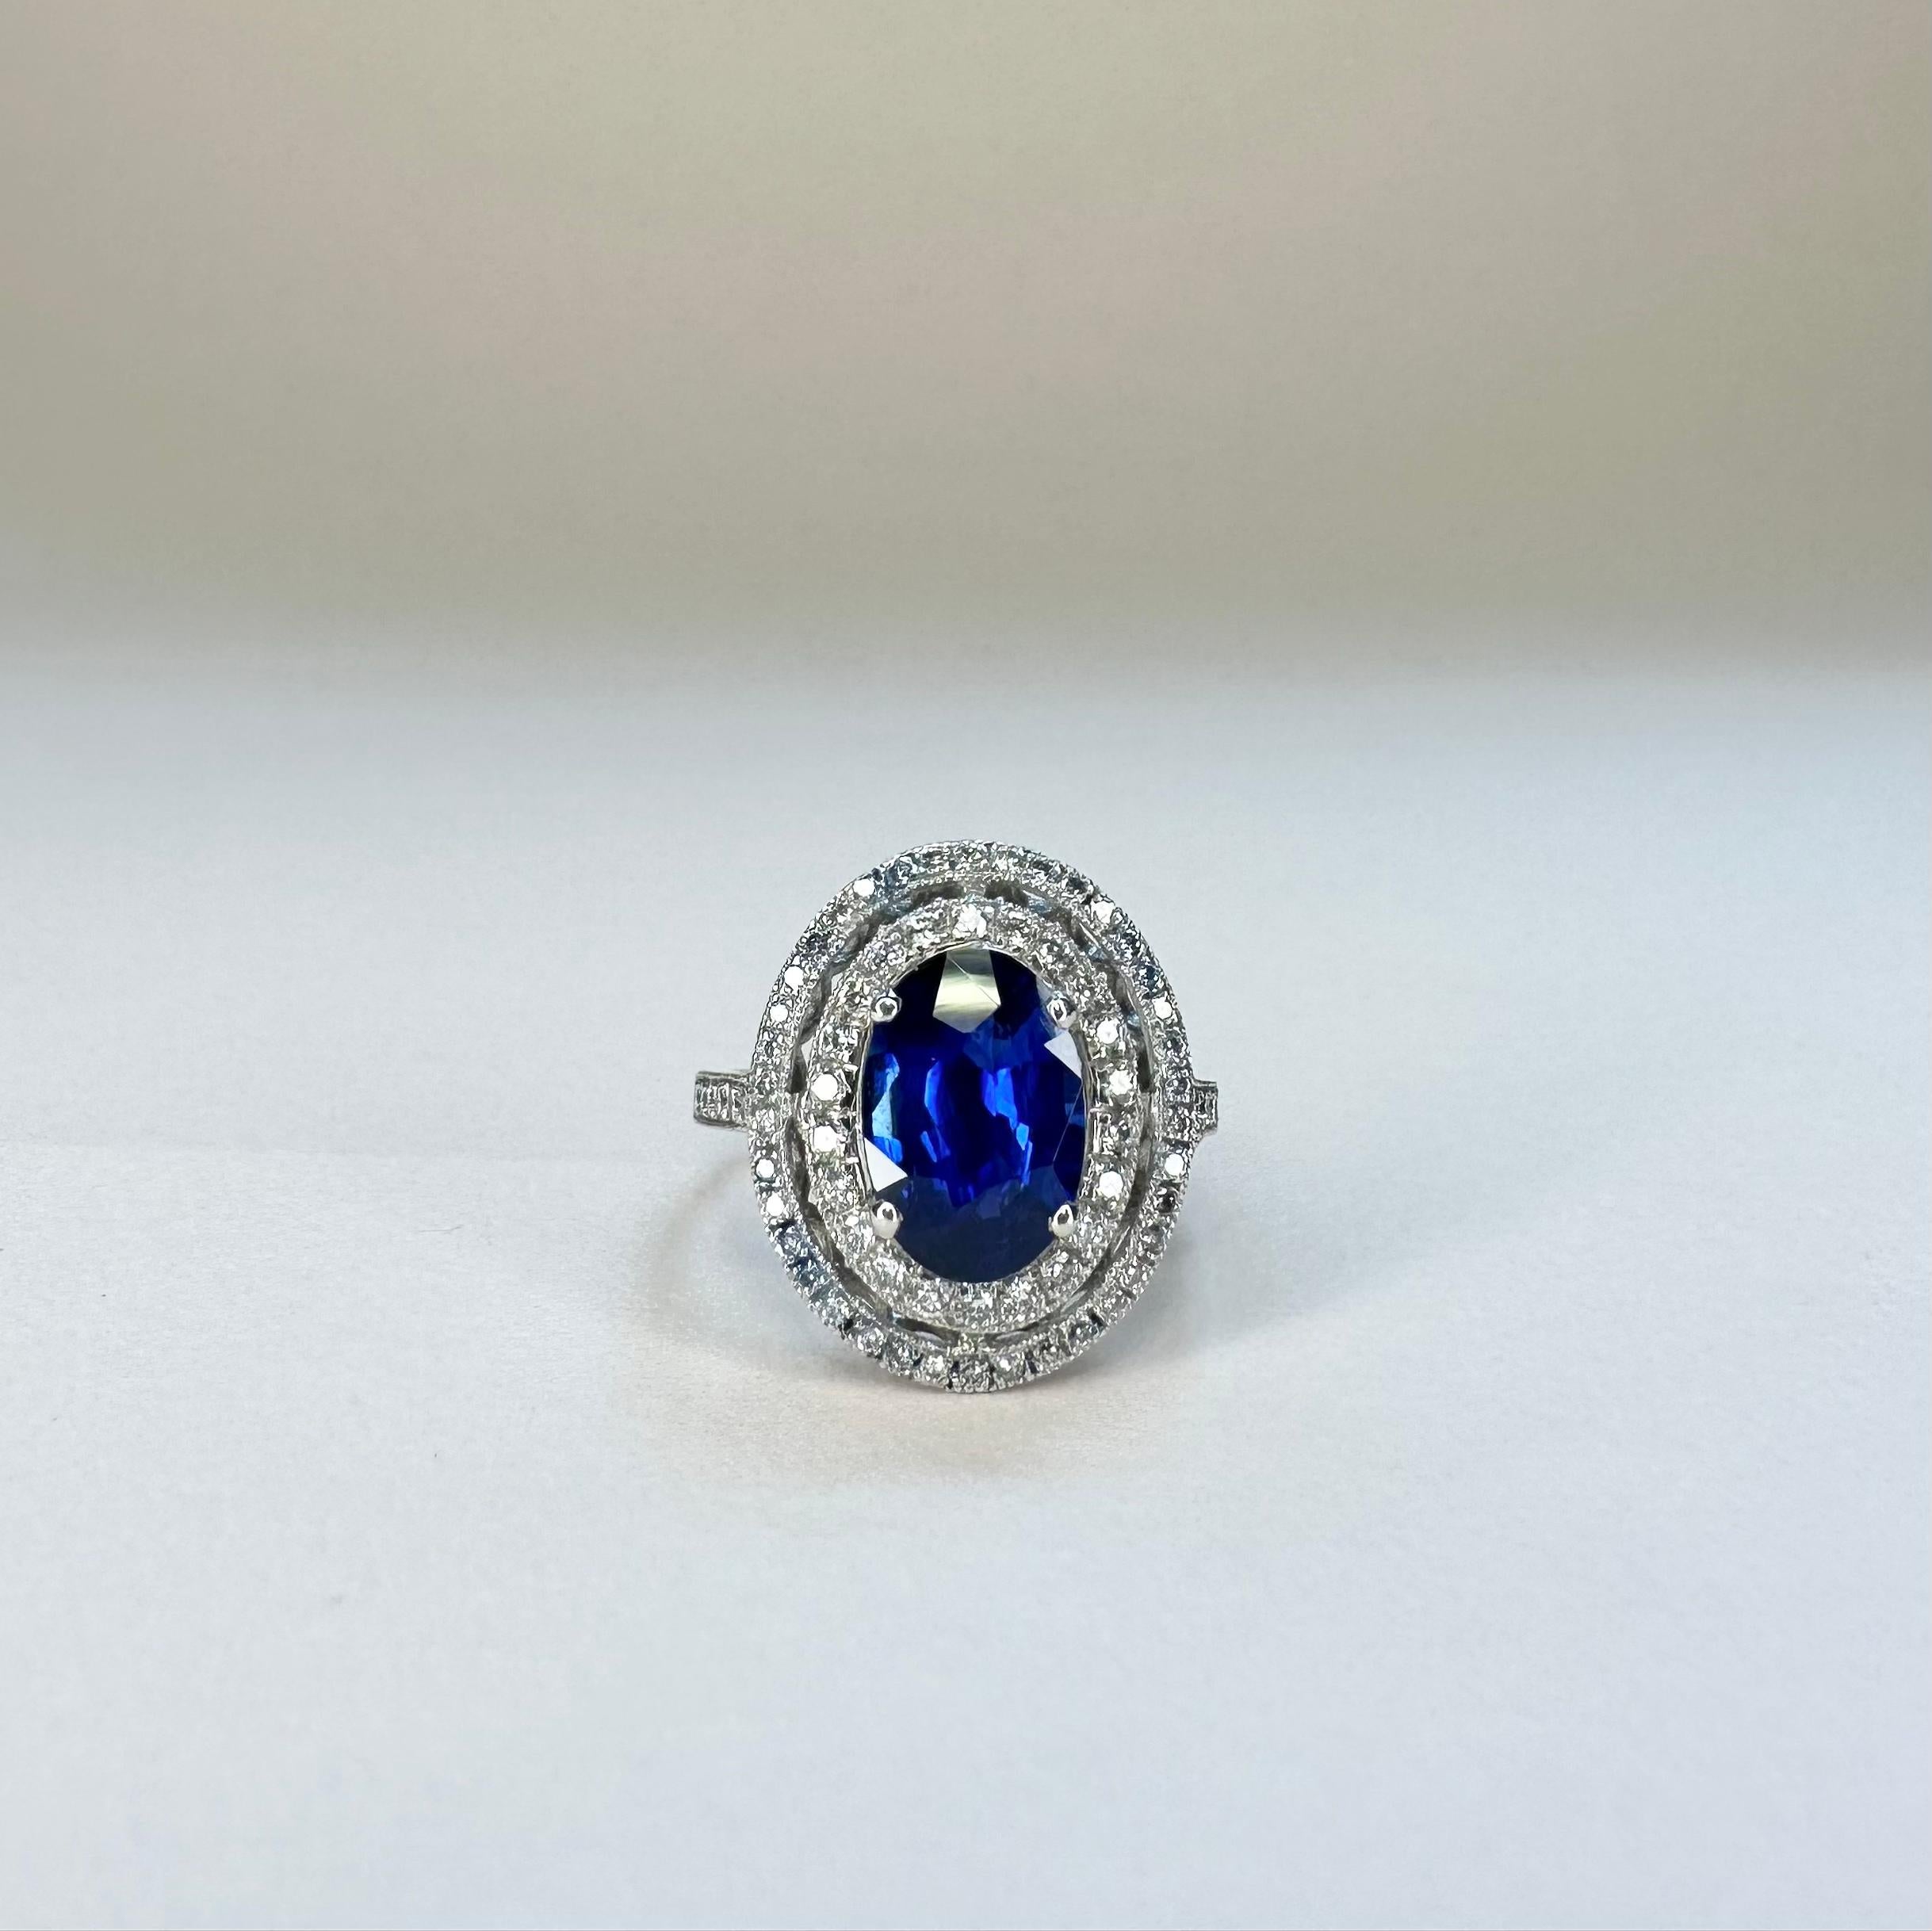 For Sale:  18k White Gold 2.74 Ct Royal Blue Oval Sapphire Ring With Two Rows of Diamonds 4